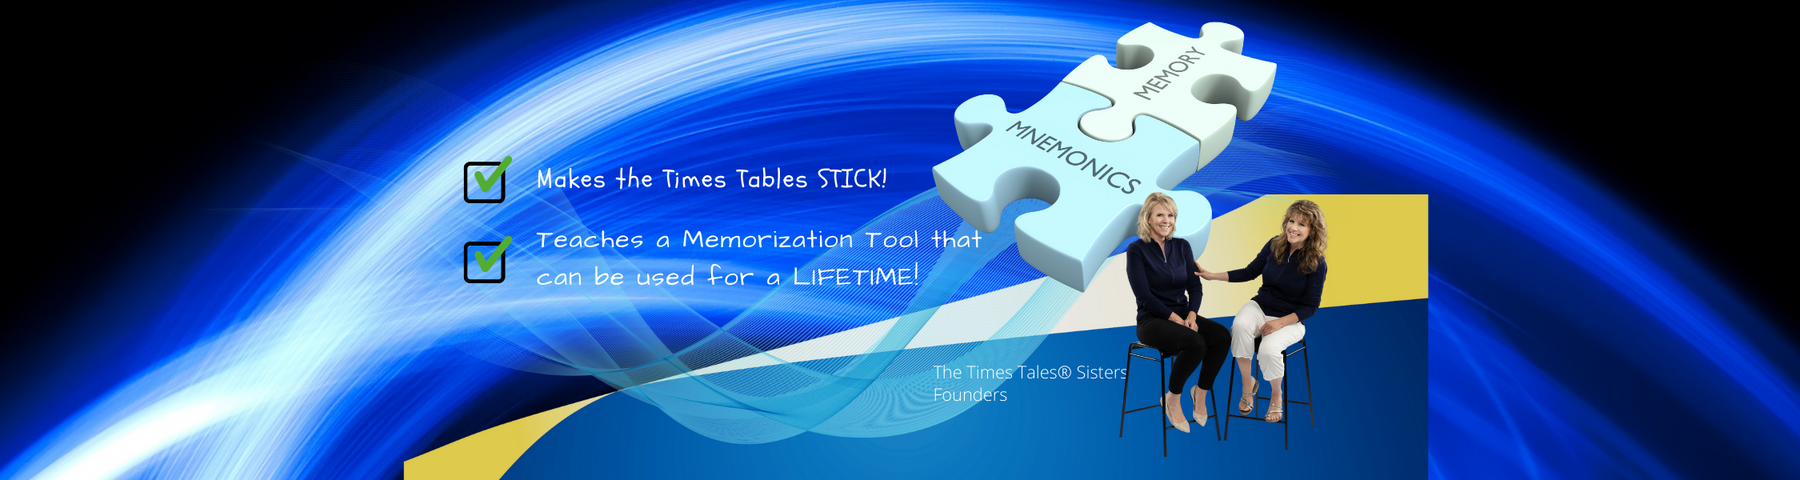 Mnemonics is by far the FASTEST and MOST EFFECTIVE way for Kids to Memorize the Times Tables.